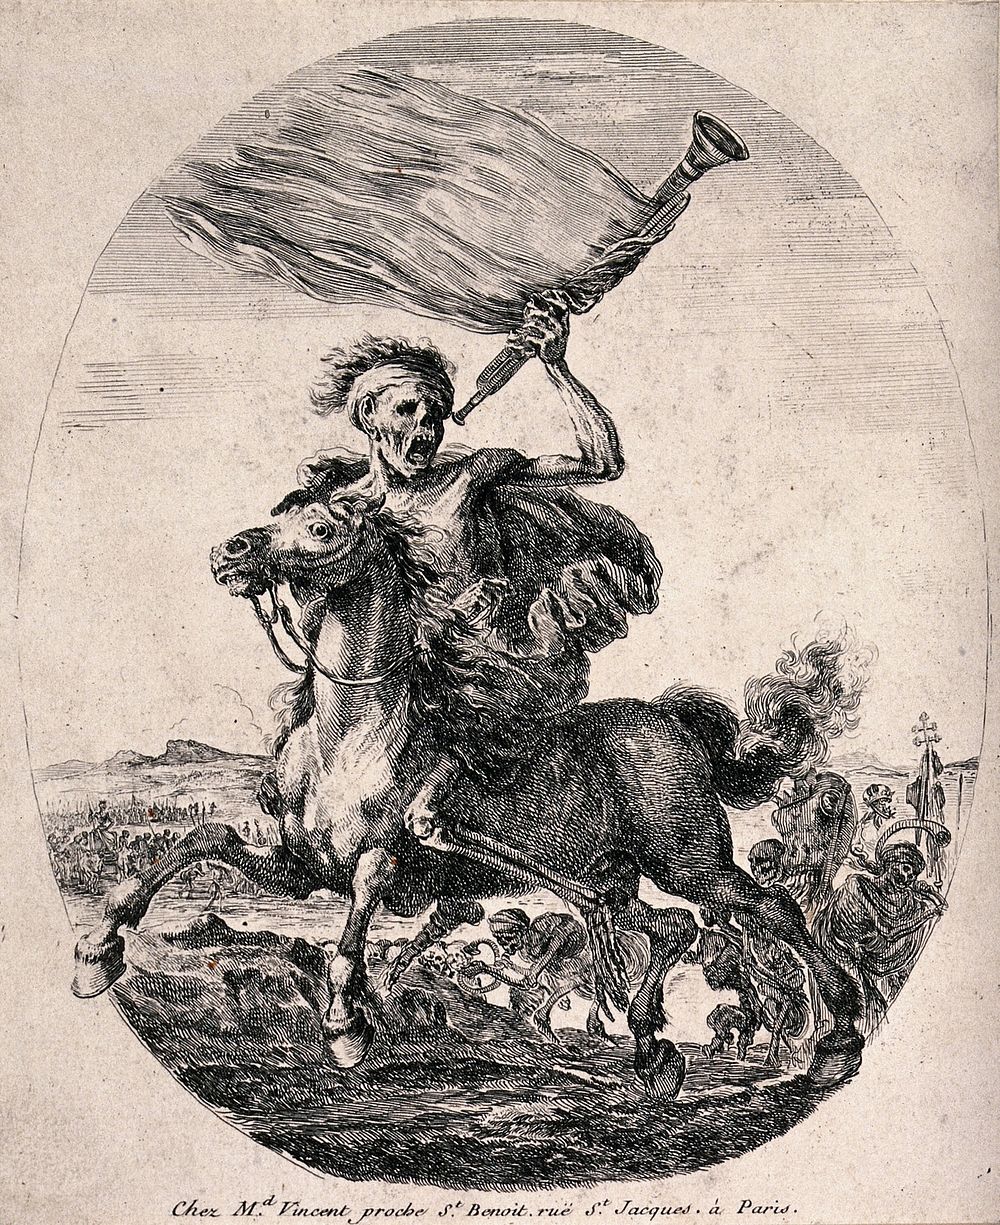 Death astride his horse is the hero of the battlefield. Etching.